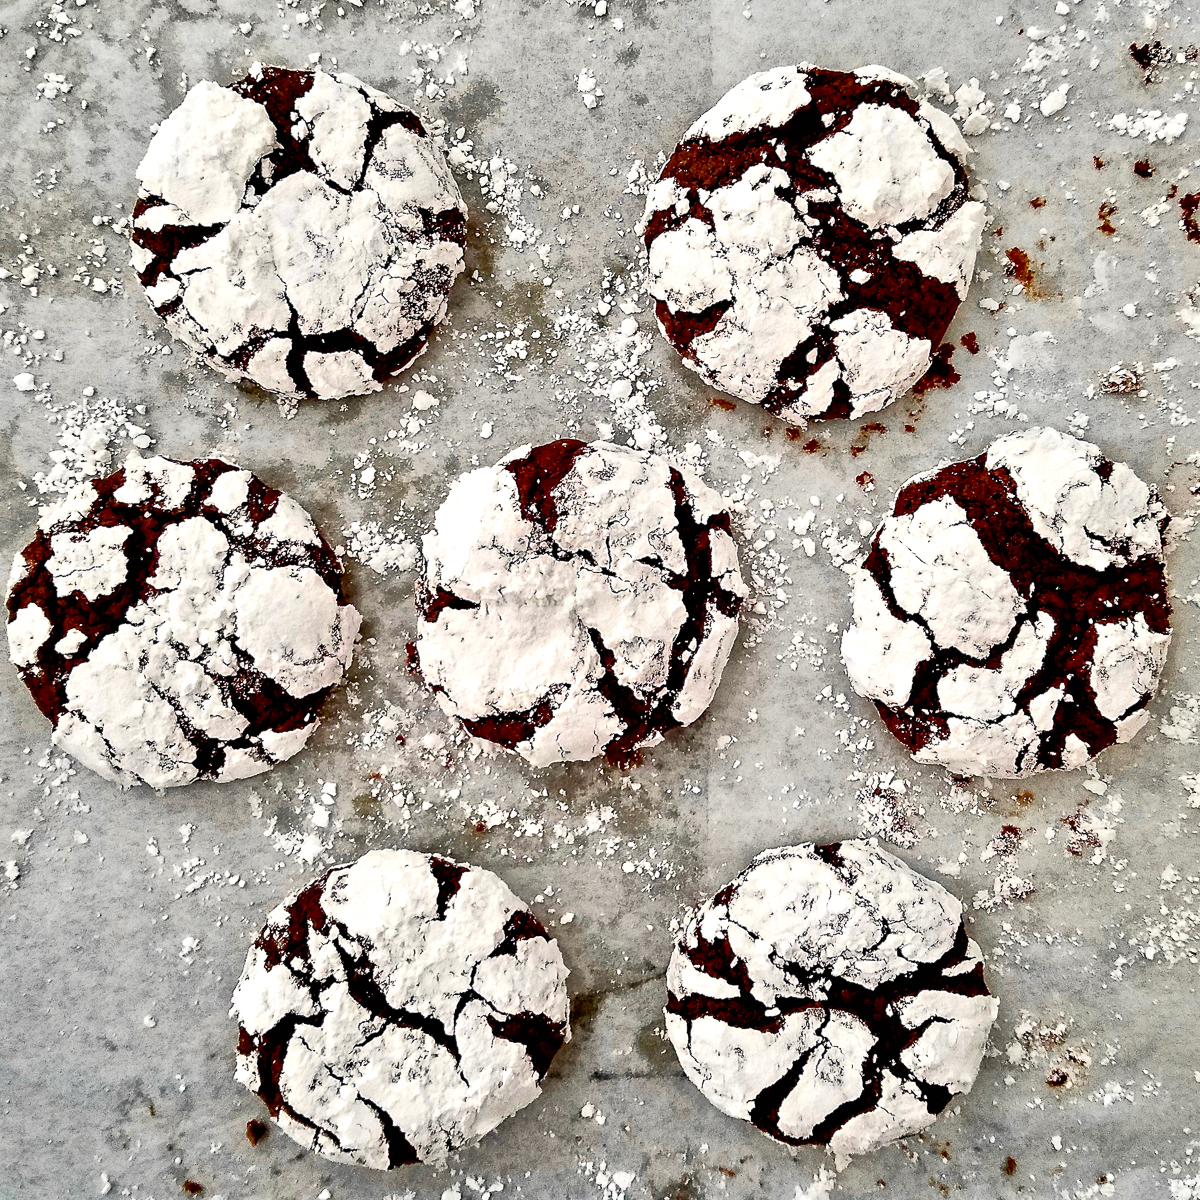 Seven crinkle cookies on a baking sheet.